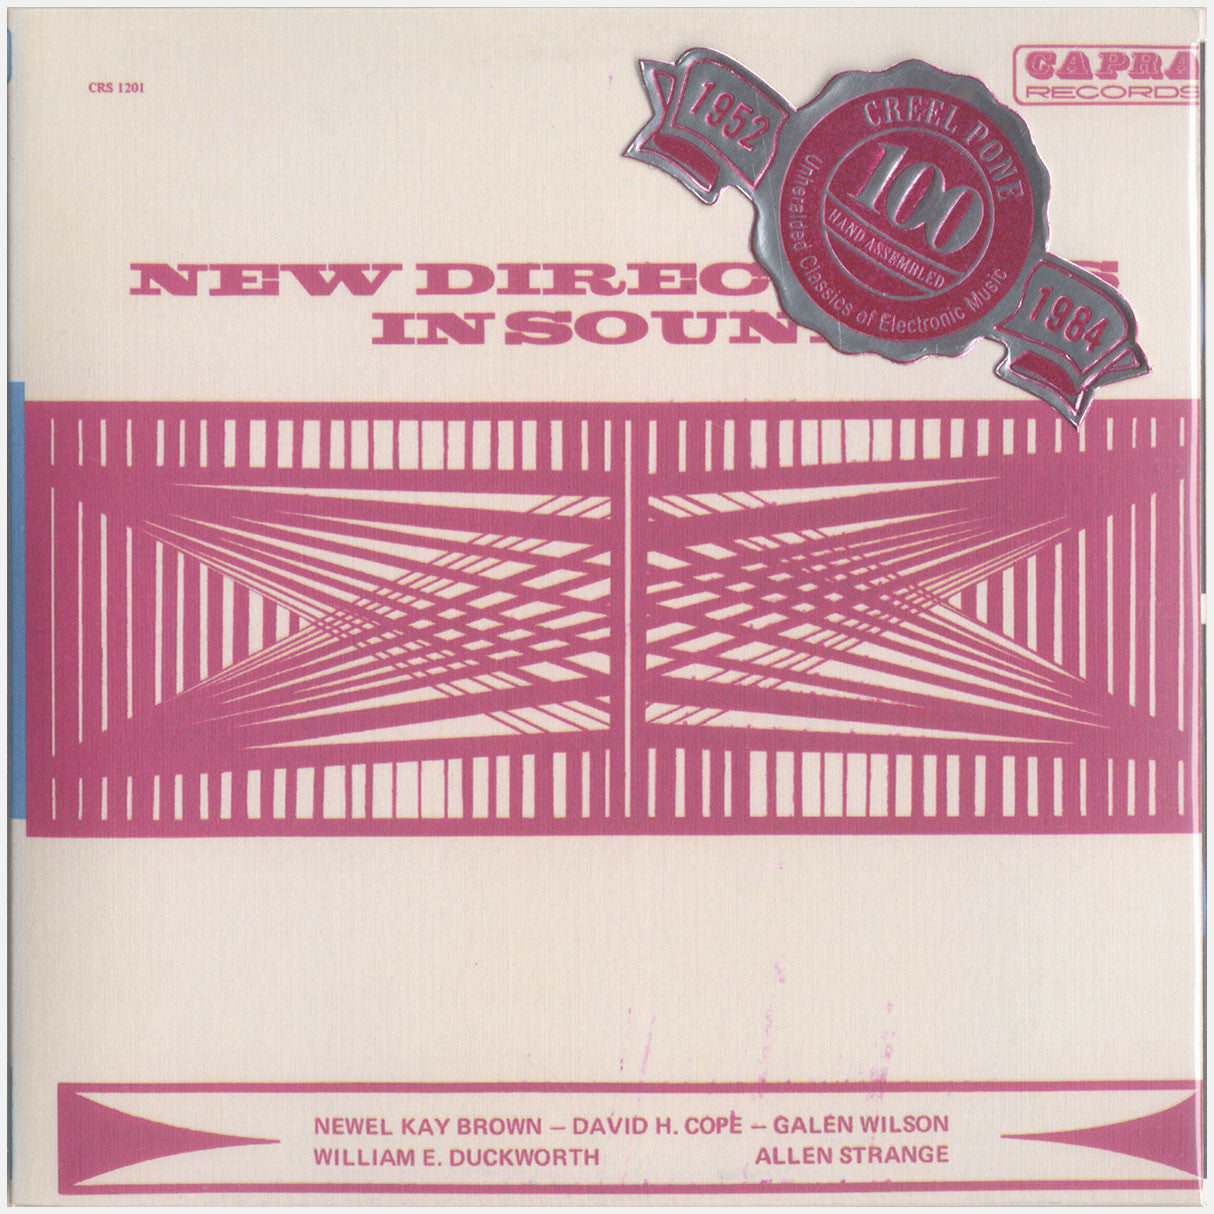 [CP 194-194.5 CD] New Directions In Sound